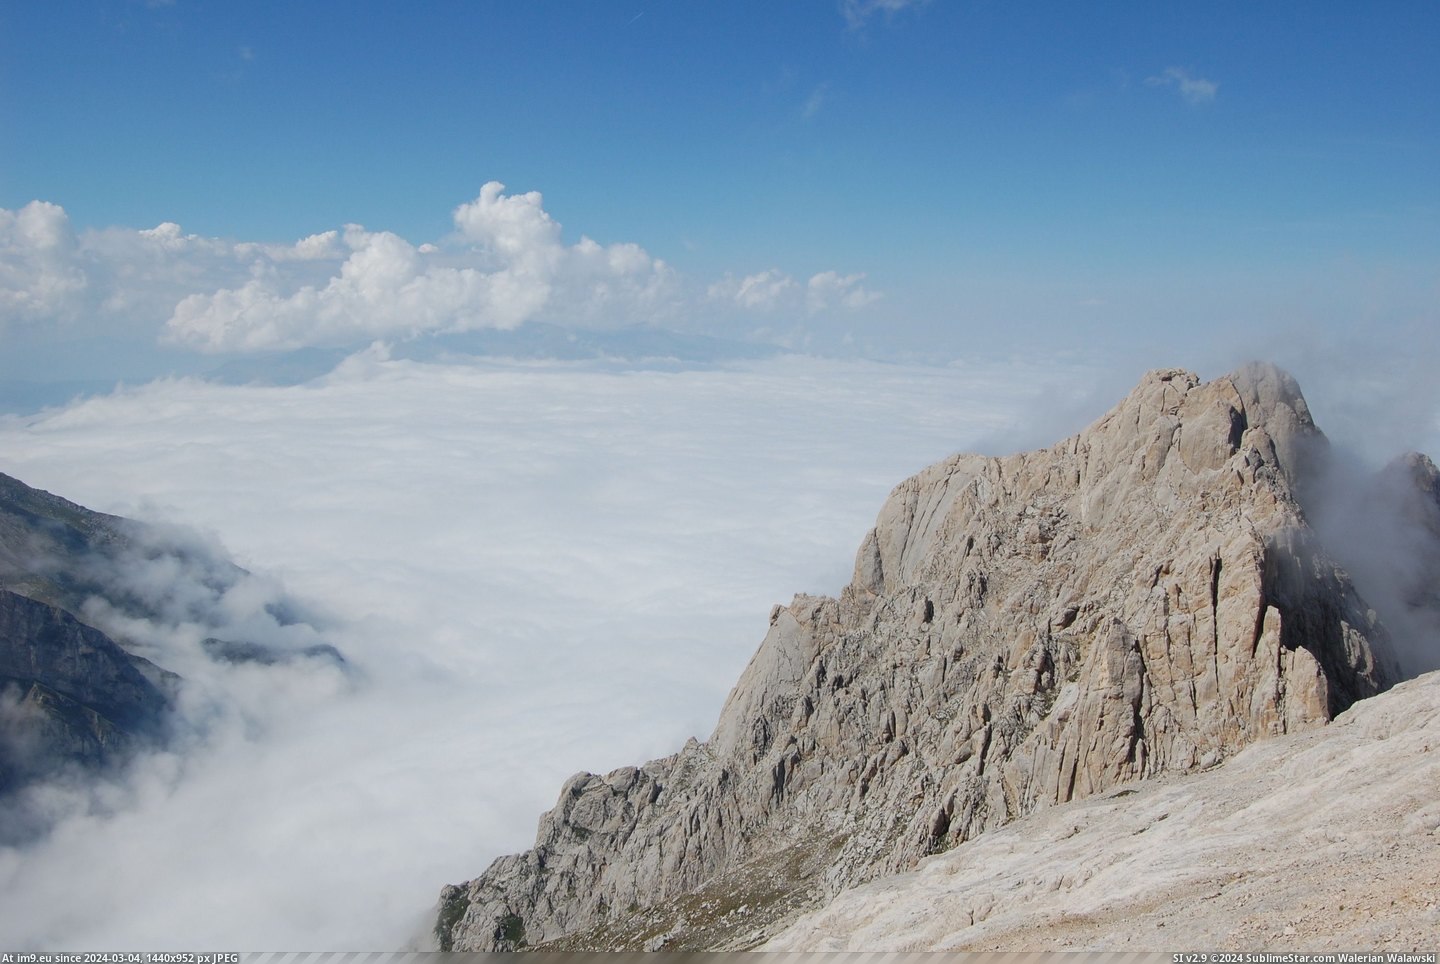 #Mountains #Italy #3008x2000 #Gran #Clouds #Central [Earthporn] Over the clouds - Gran Sasso mountains, Abruzzo, Central Italy  - [3008x2000] Pic. (Image of album My r/EARTHPORN favs))